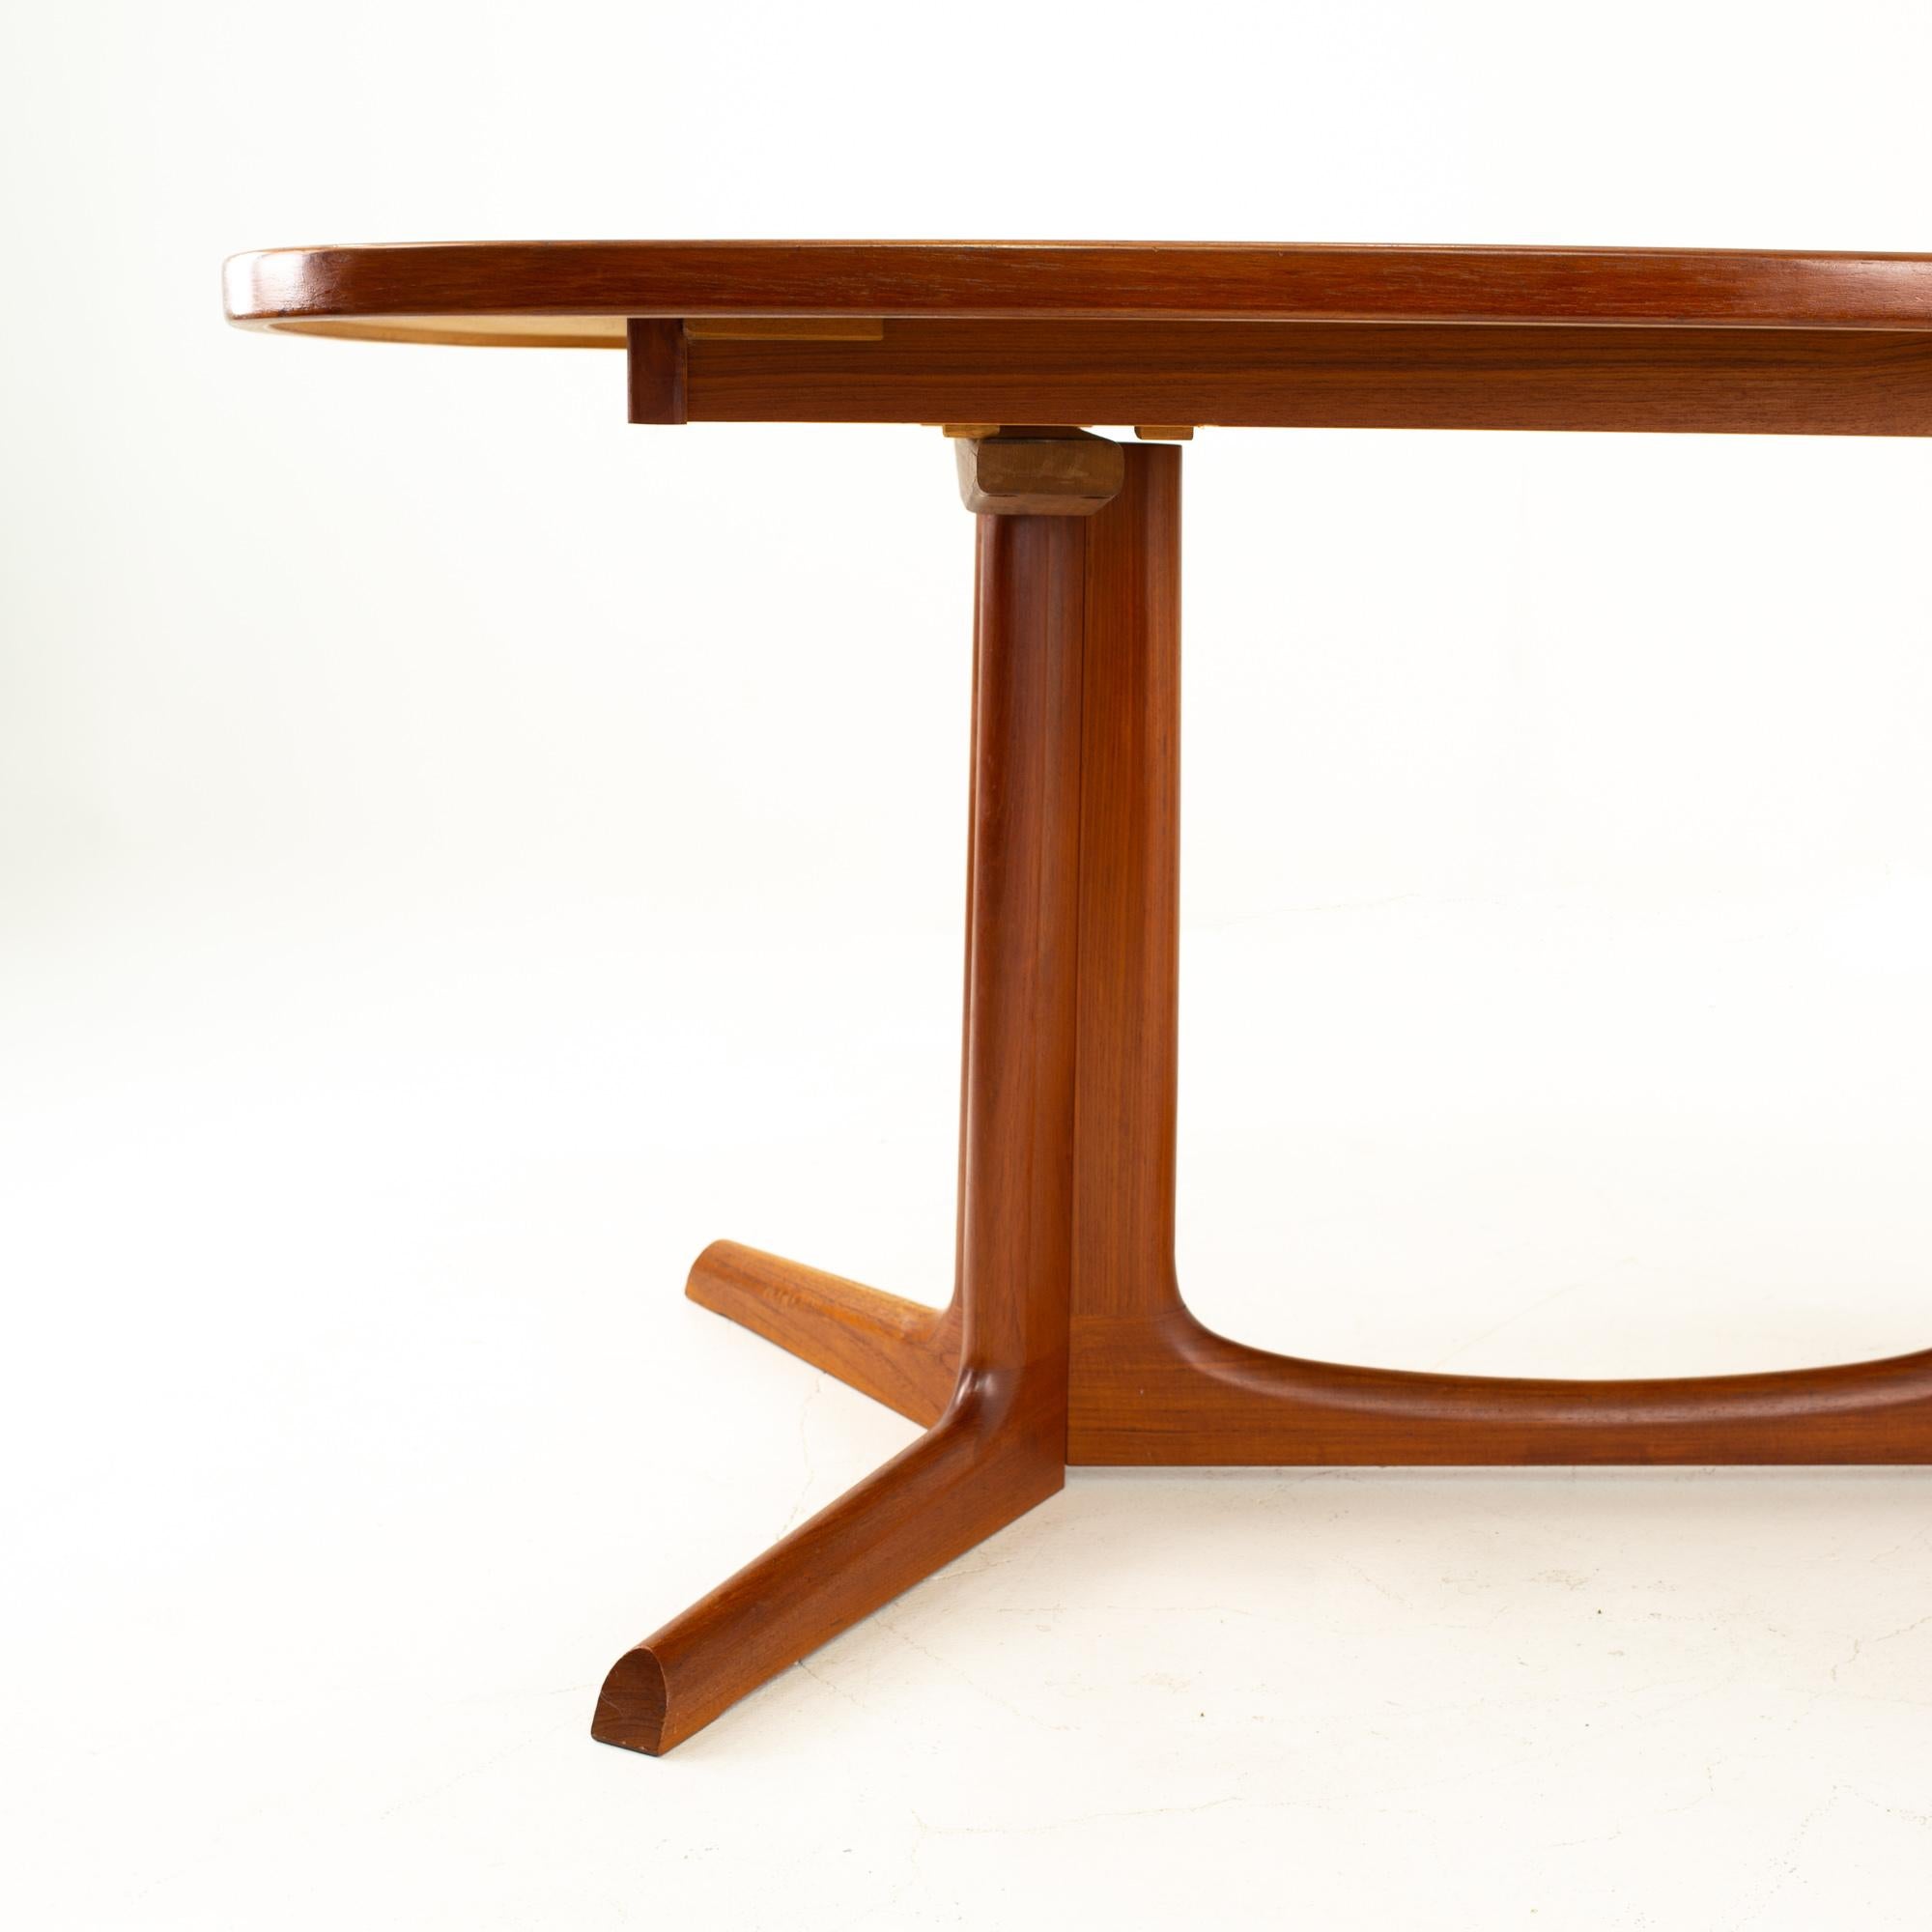 Late 20th Century Gudme Mobelfabrik Midcentury Dining Table with 2 Leaves